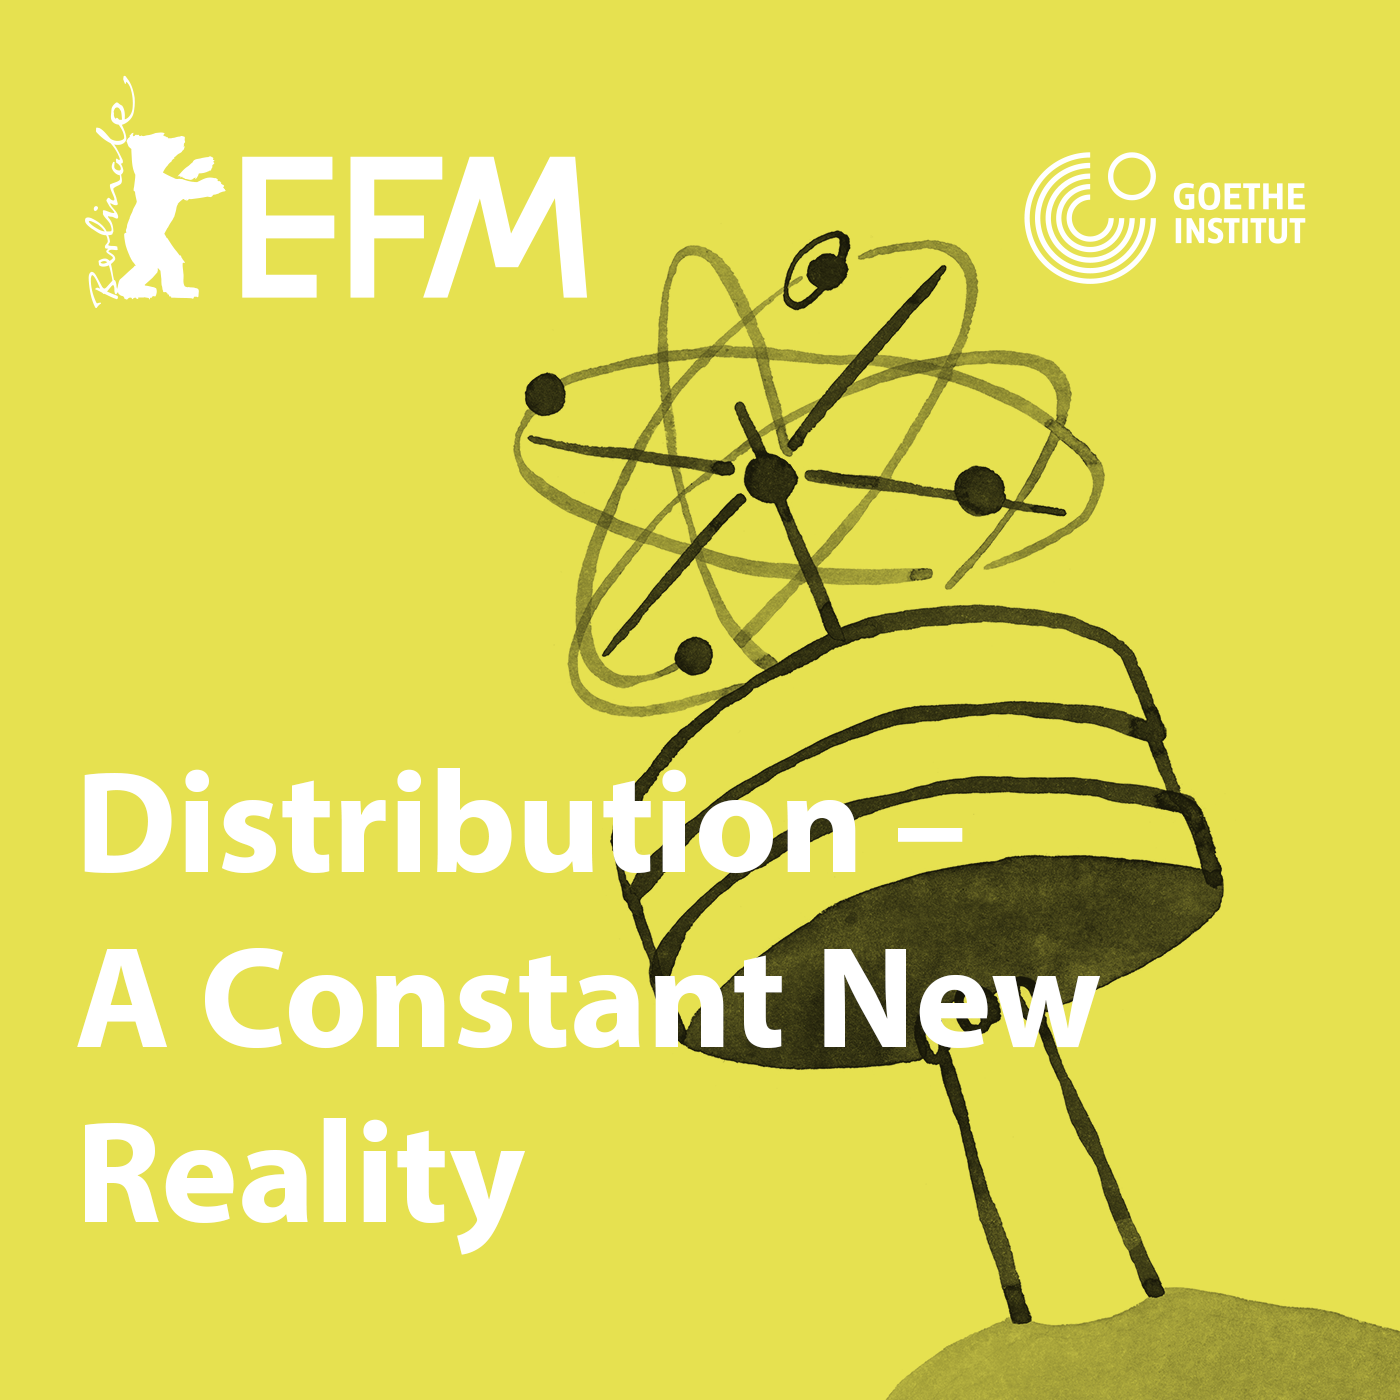 Distribution - A Constant New Reality